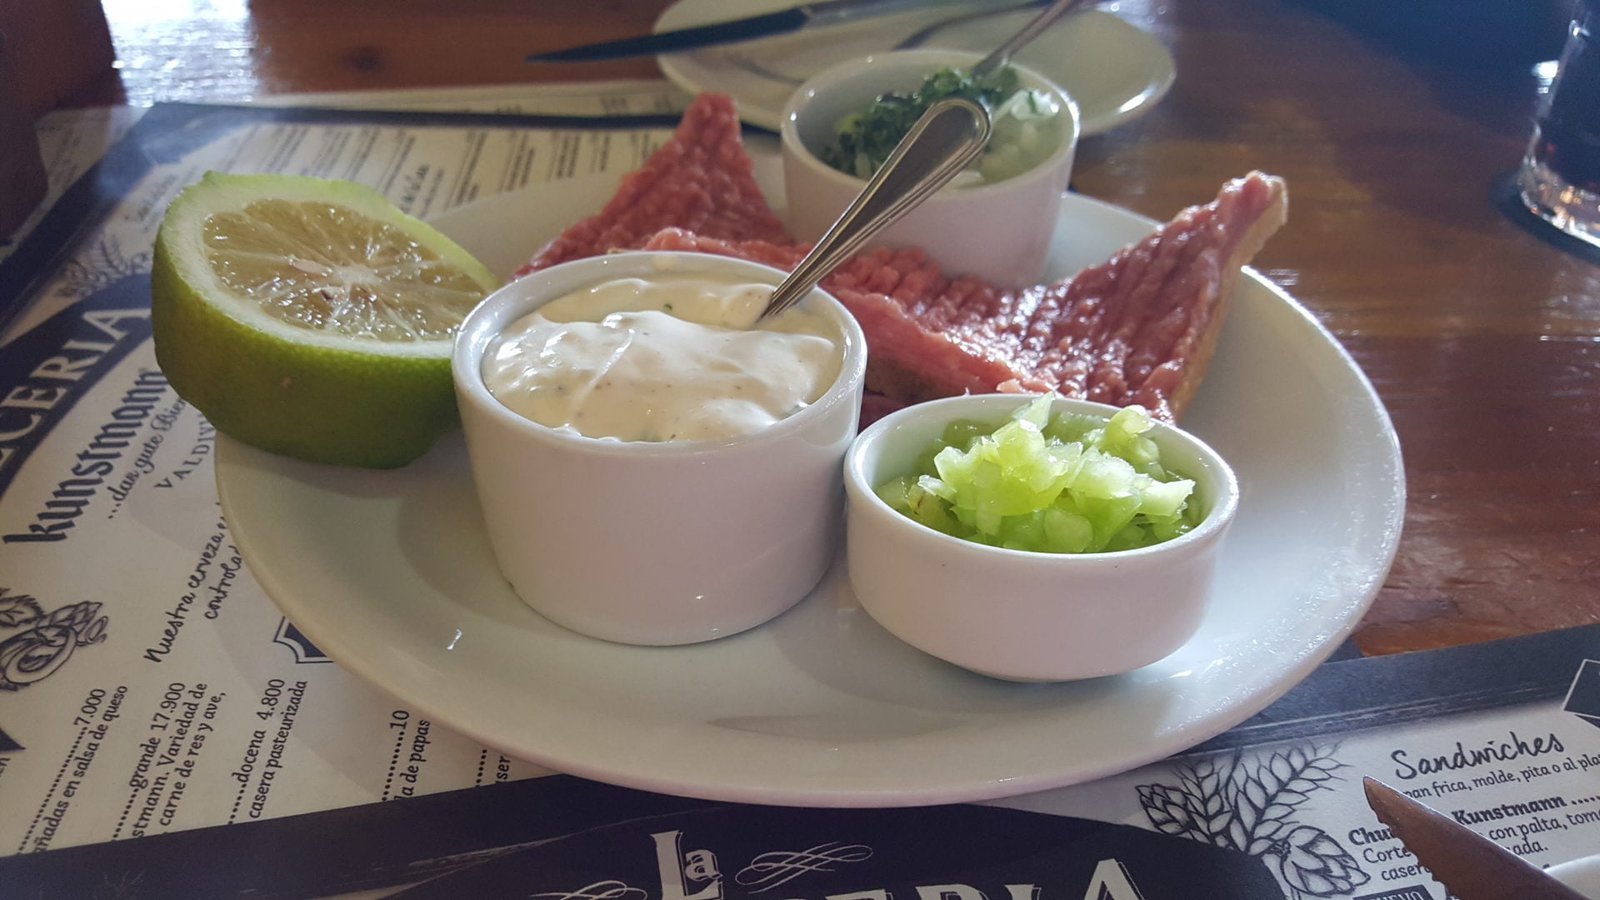 Carne cruda at Kunstmann Brewery in Valdivia, Chile